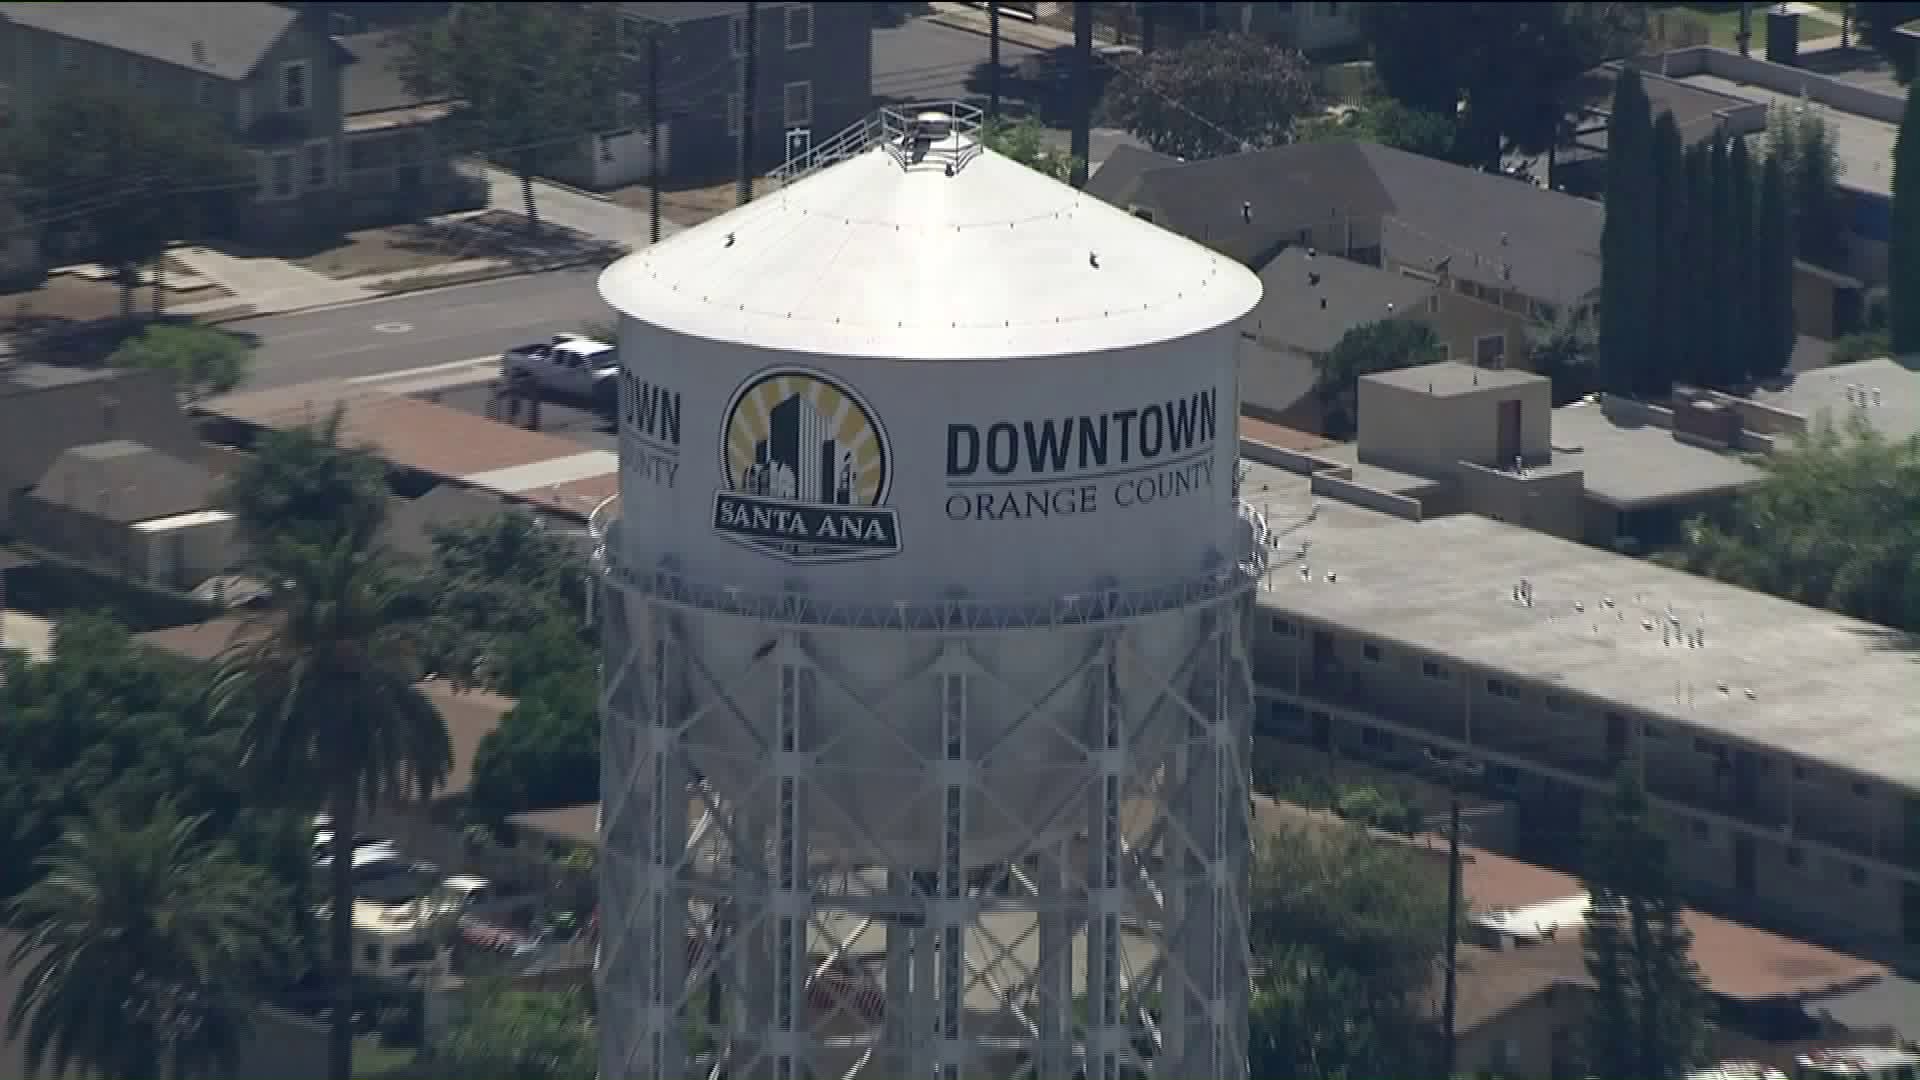 Ktla Breaking Man Carrying Drone Has Climbed To Top Of Water Tower In Santa Ana Police Are There T Co Iqahnndtf2 T Co Jmkscdlolu